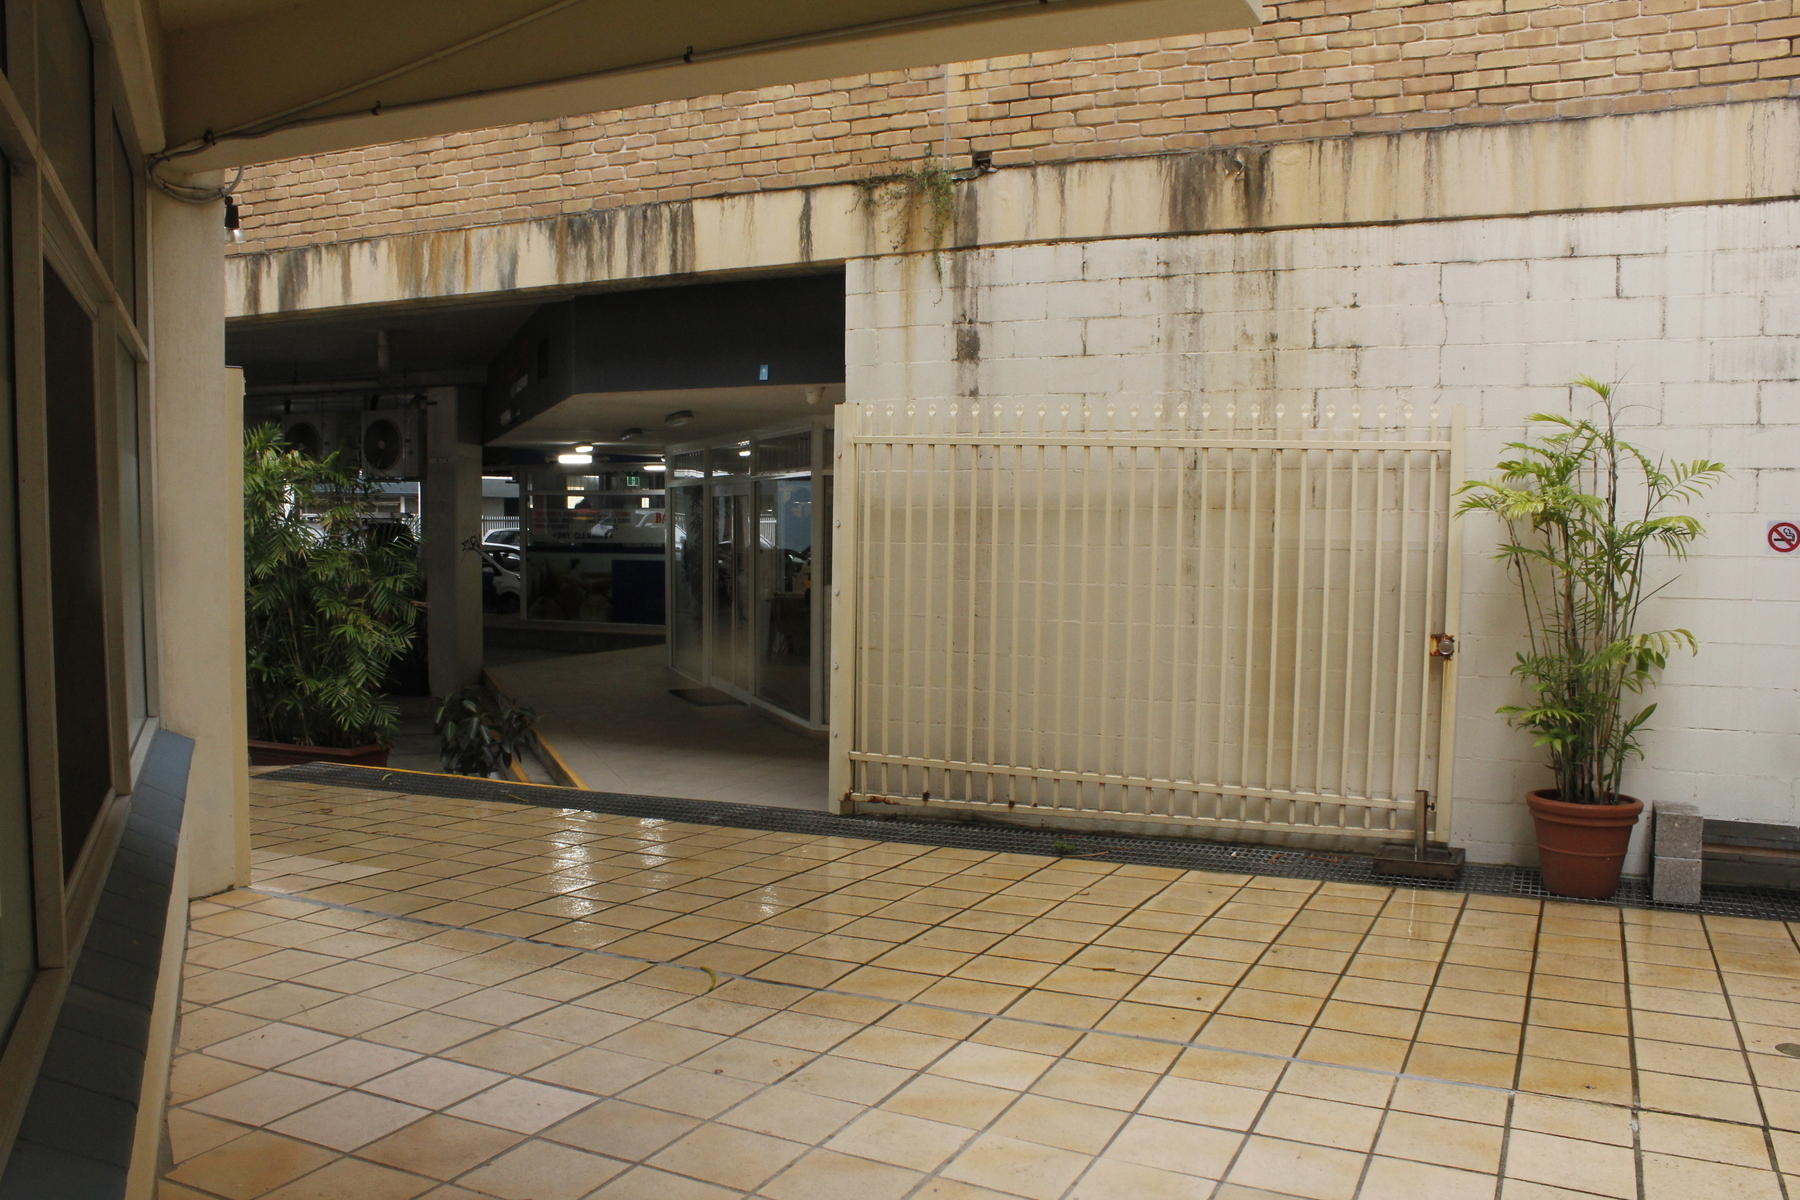 A wide rectangular space in a wall opens through to a shadowy realm of plants, pillars, cars, fluorescent lights and a walkway passing glass doors. Before the wall is a shopfront on the left and a floor of square tiles. The tiles closest to the wall are wet and shiny. A wide steel gate folds back against the wall, next to a tall potted plant.